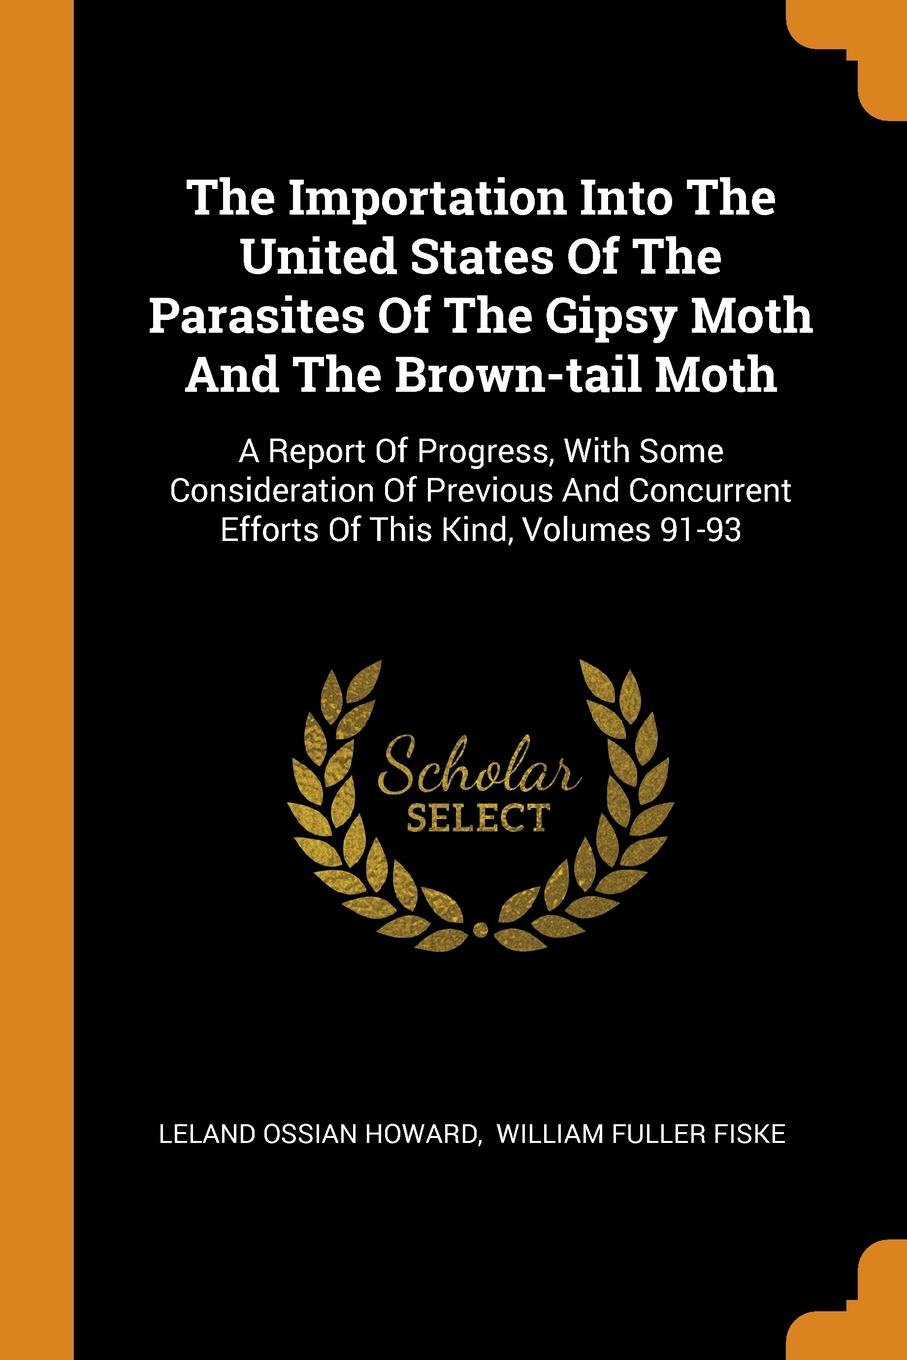 The Importation Into The United States Of The Parasites Of The Gipsy Moth And The Brown-tail Moth. A Report Of Progress, With Some Consideration Of Previous And Concurrent Efforts Of This Kind, Volumes 91-93